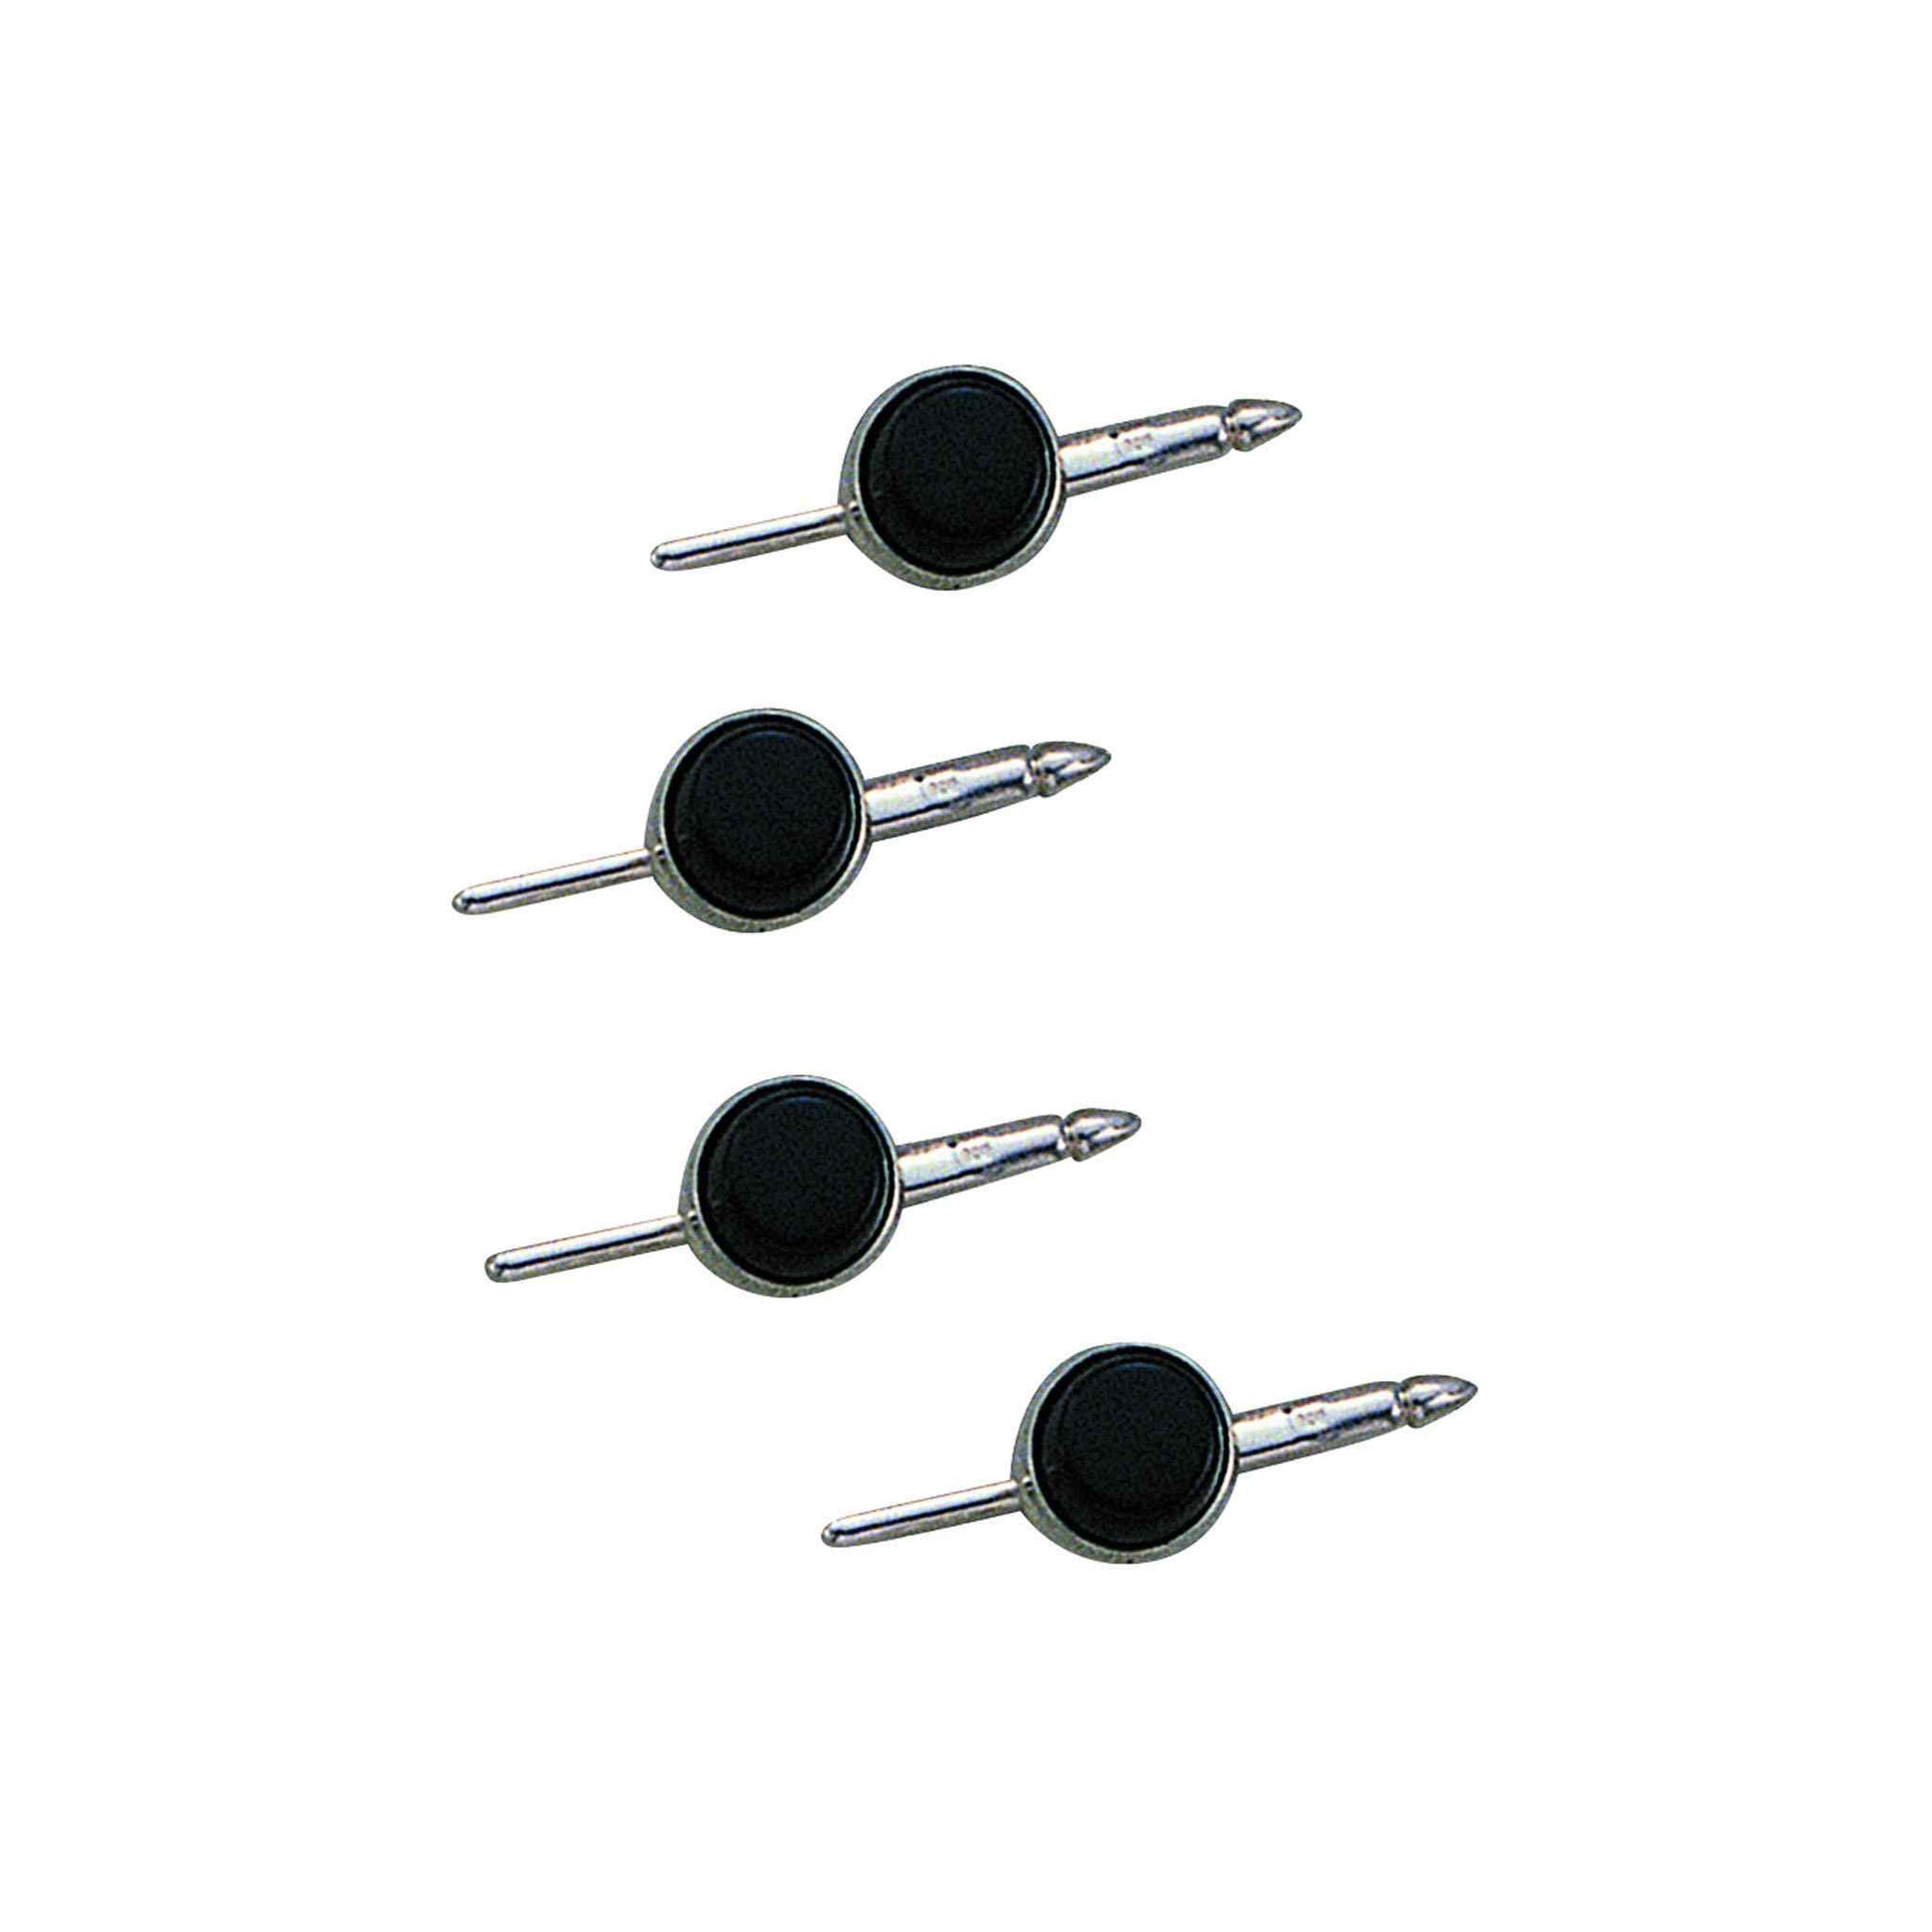 A four piece sterling silver round stud set with onyx displayed on a neutral white background.